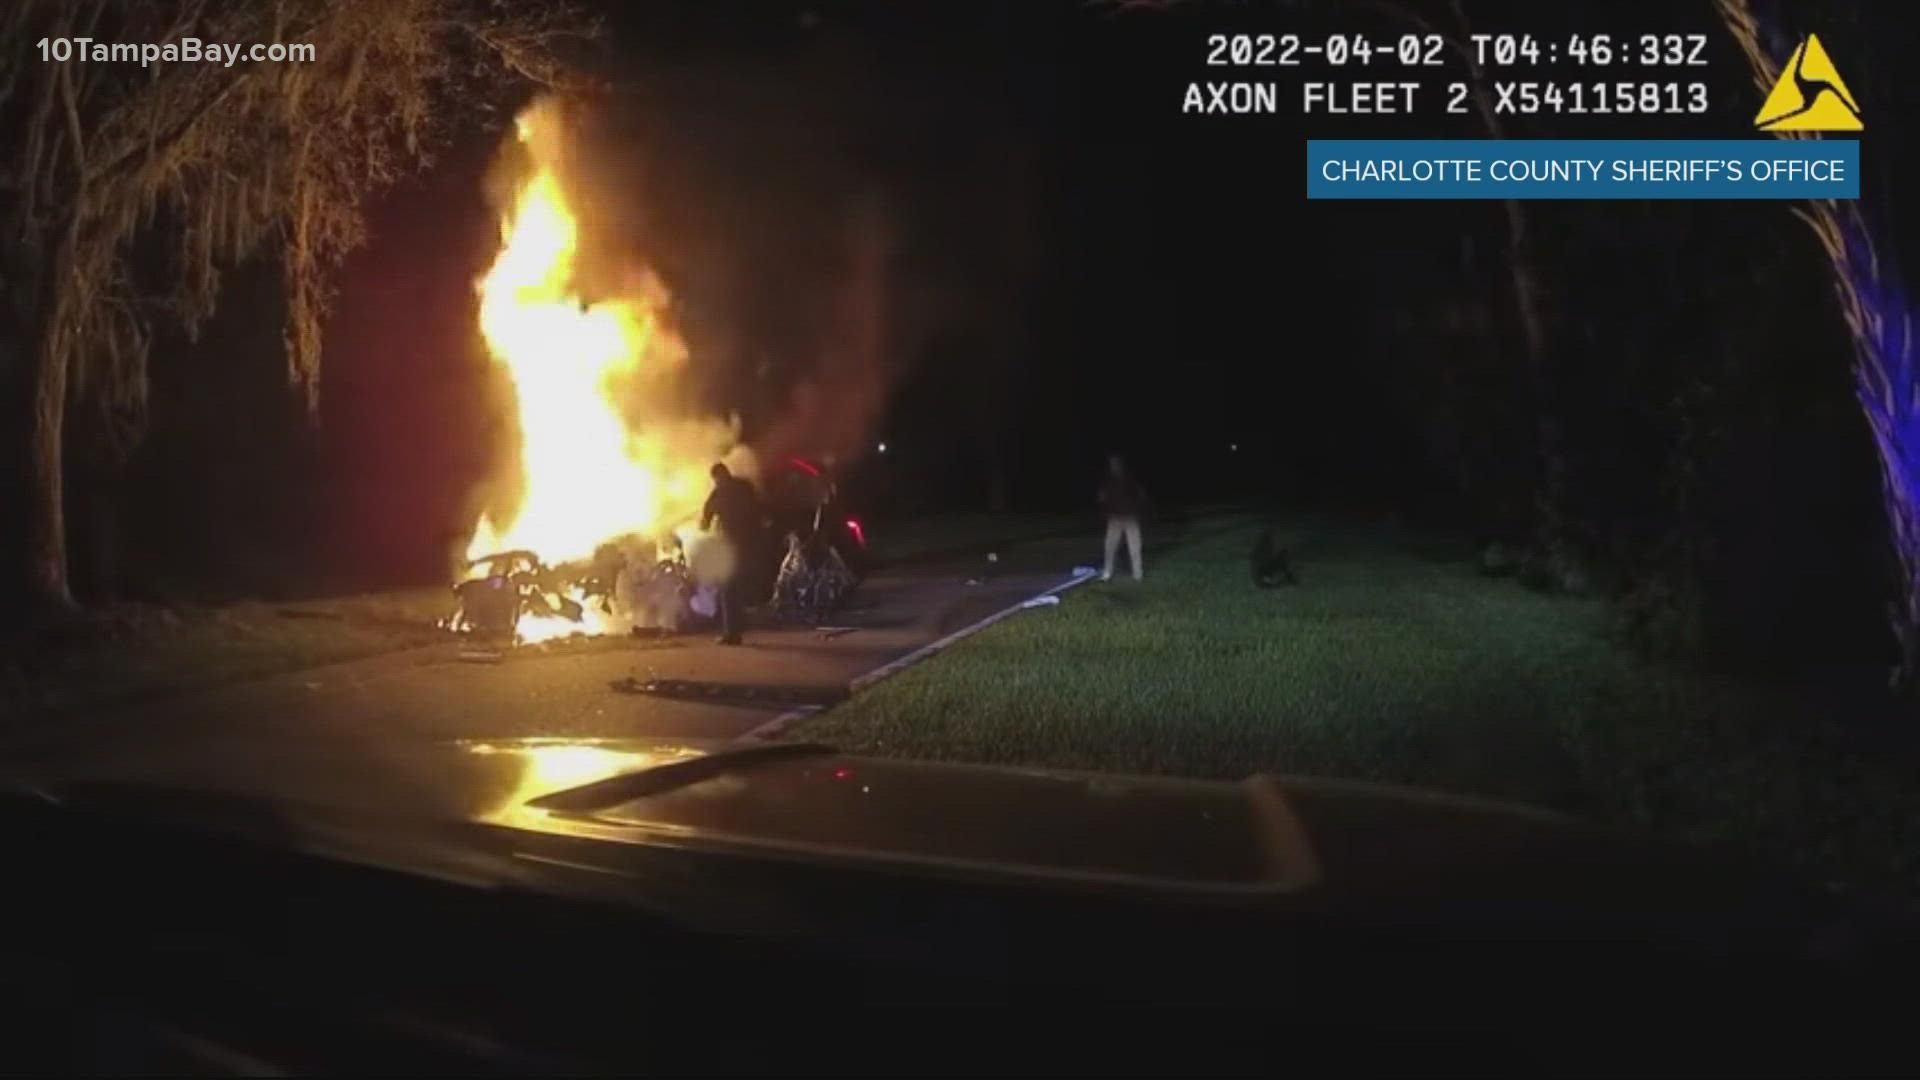 The deputies used a pocketknife to free the man from his seatbelt while battling the flames overtaking the car.